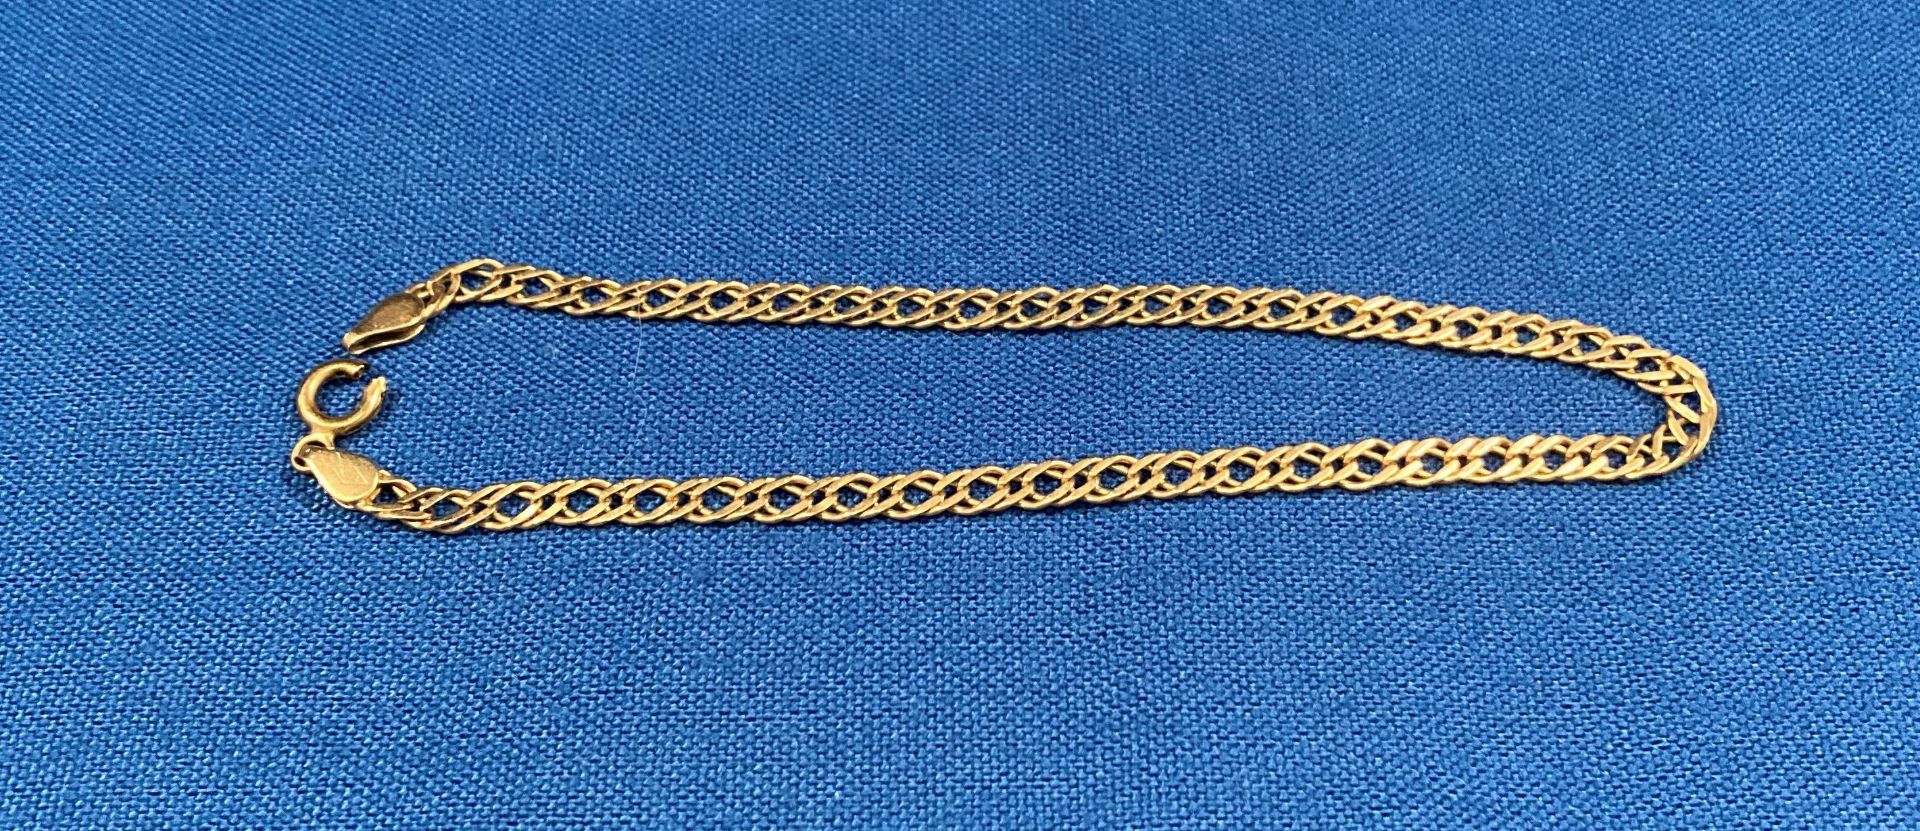 14ct gold (585) link bracelet with broken clasp, 8" long. Weight: 3.